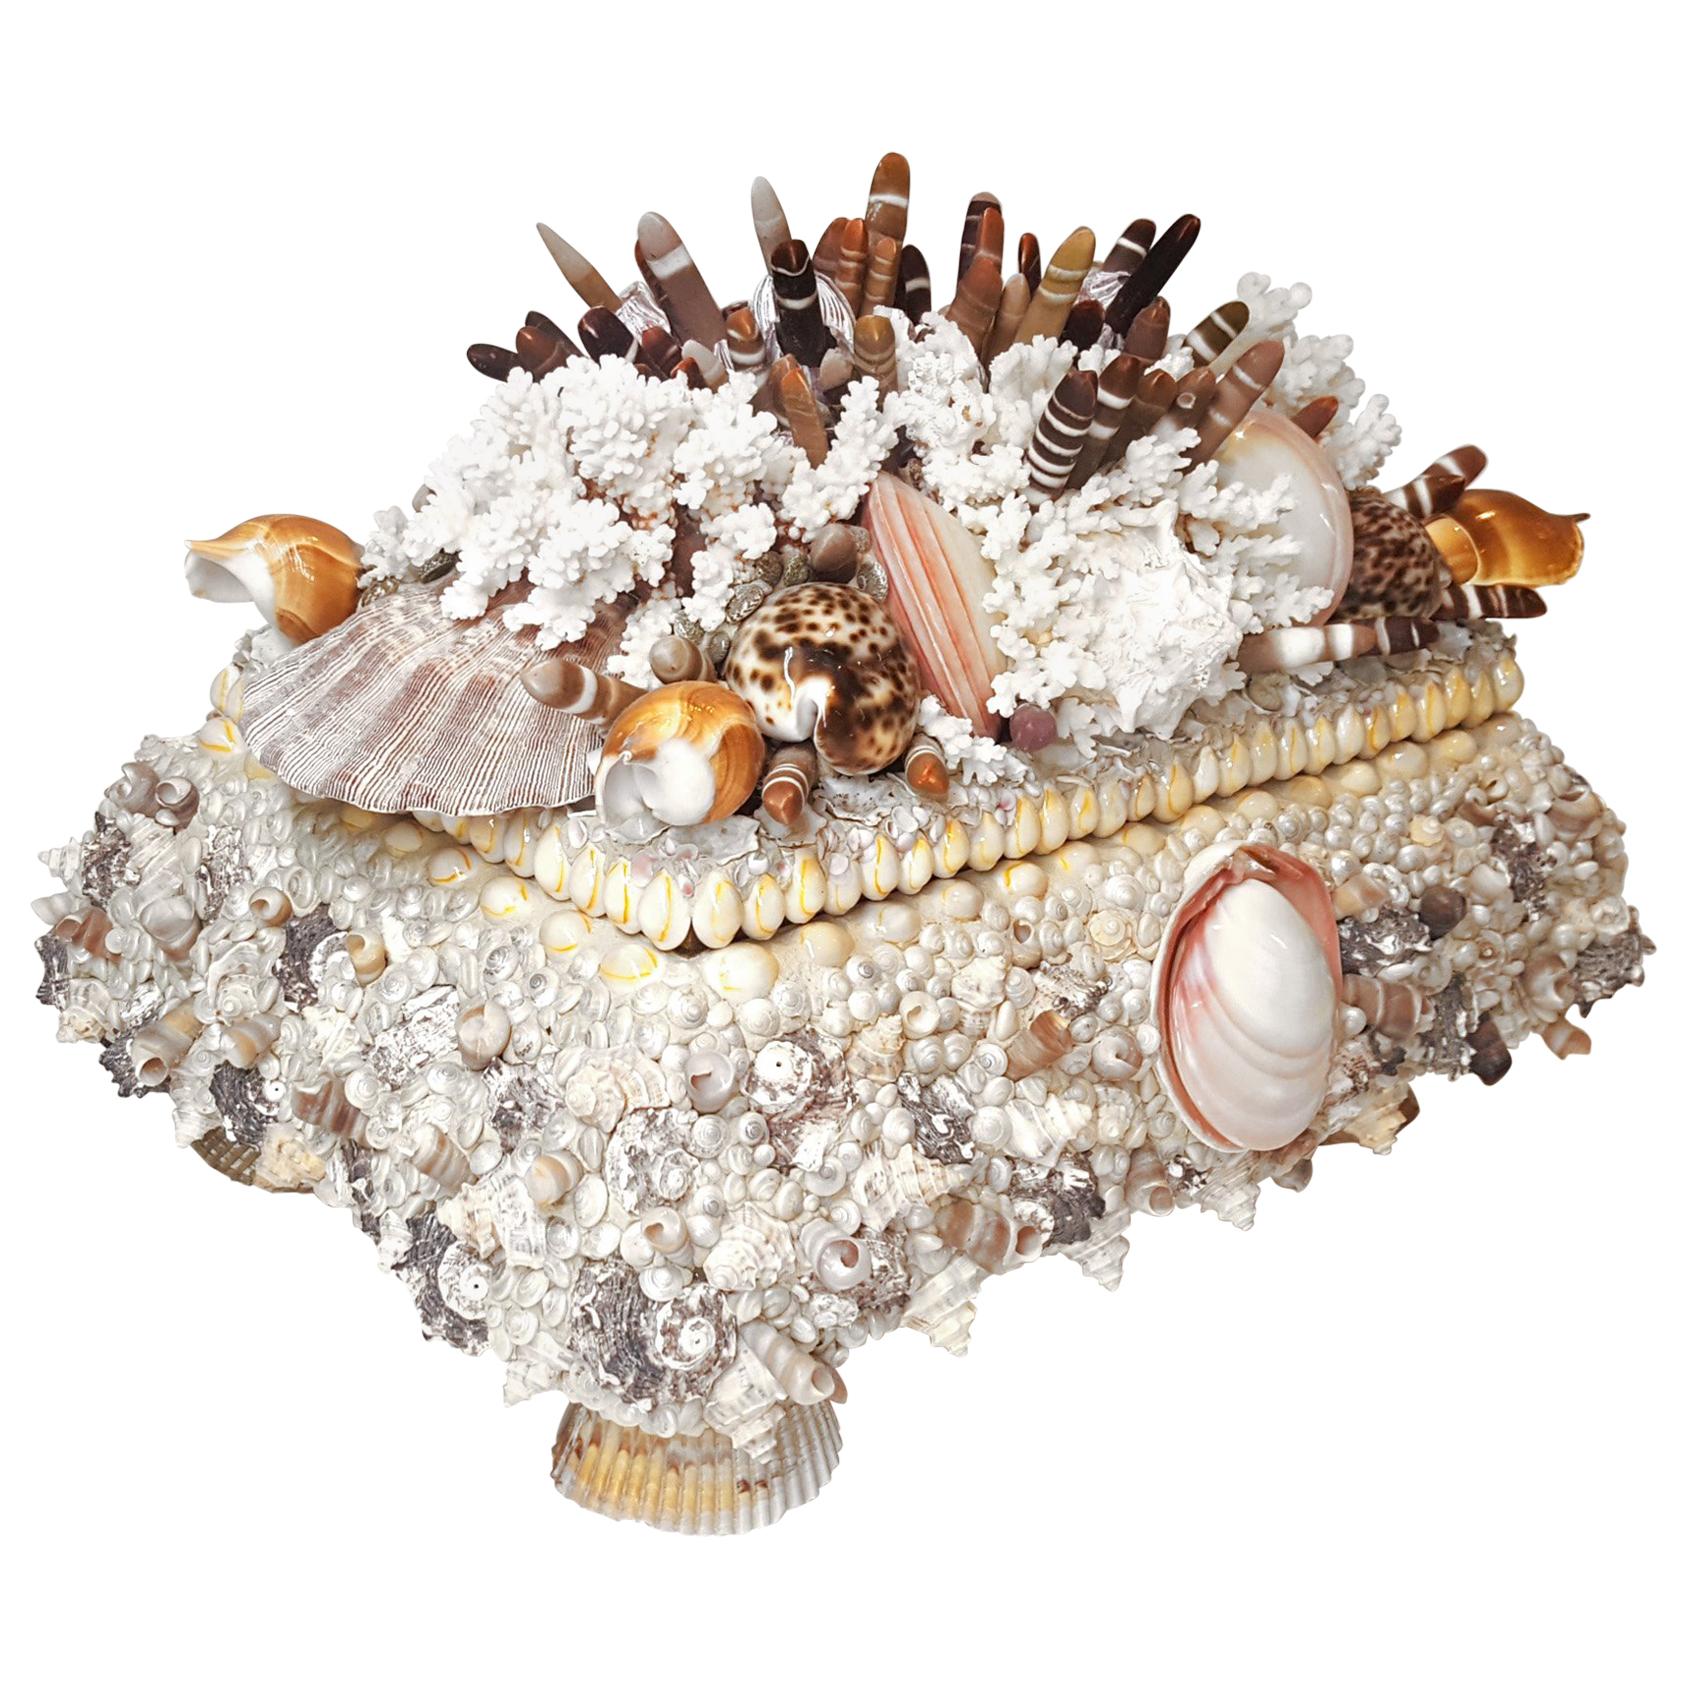 One-of-a-Kind Handmade Exotic Sea Shell Encrusted Large Scale Jewelry Box